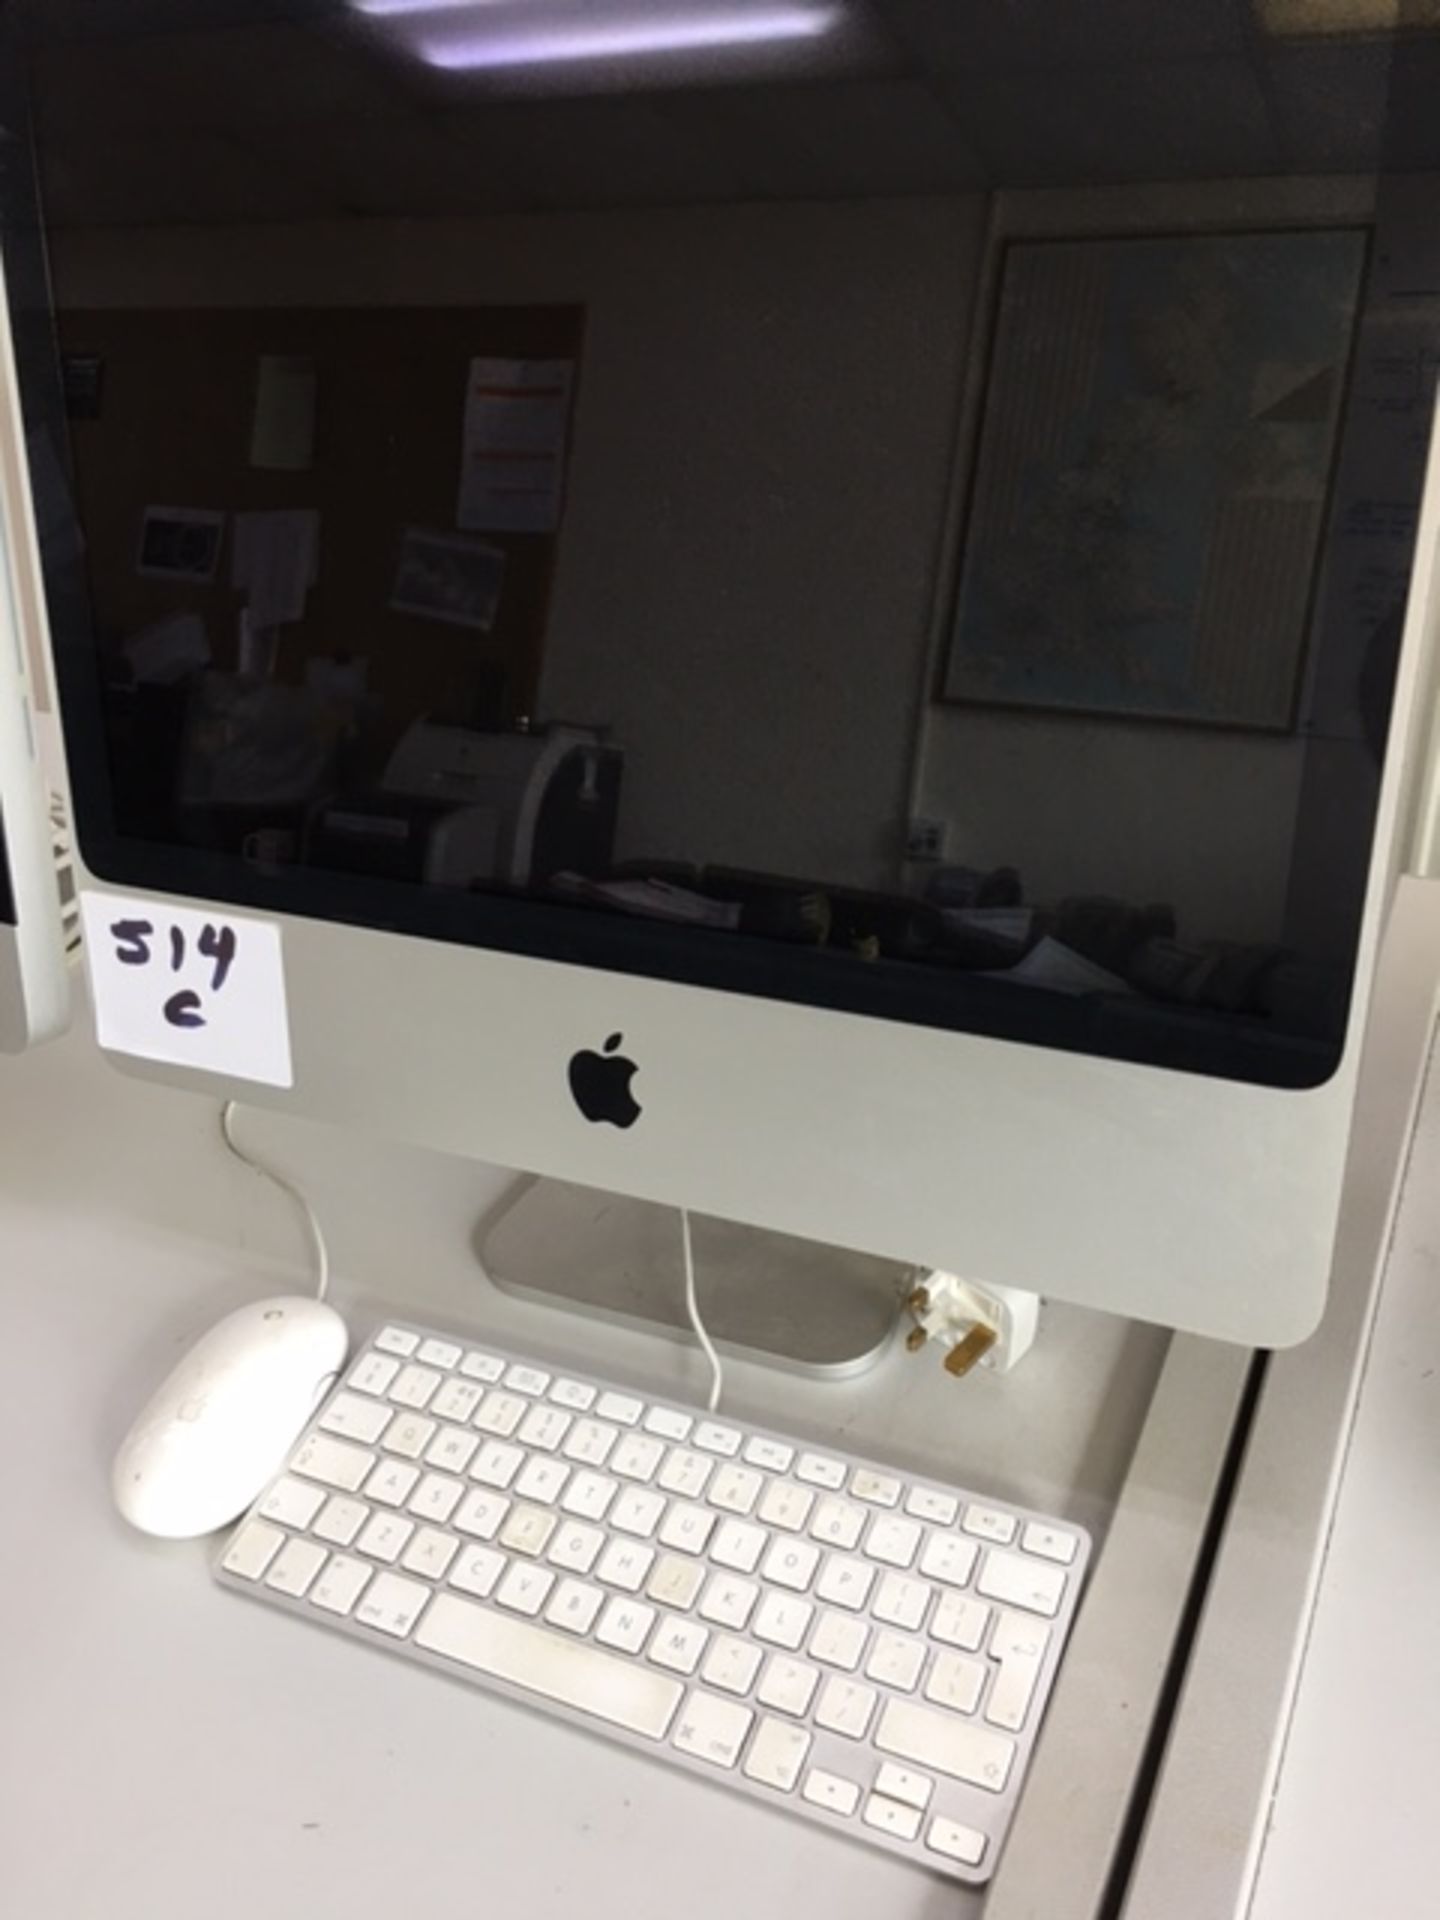 Apple iMac 20" with 2.66 GHz Intel Core 2 Duo processor; 4GB667 MHz DDR SD RAM Serial Number